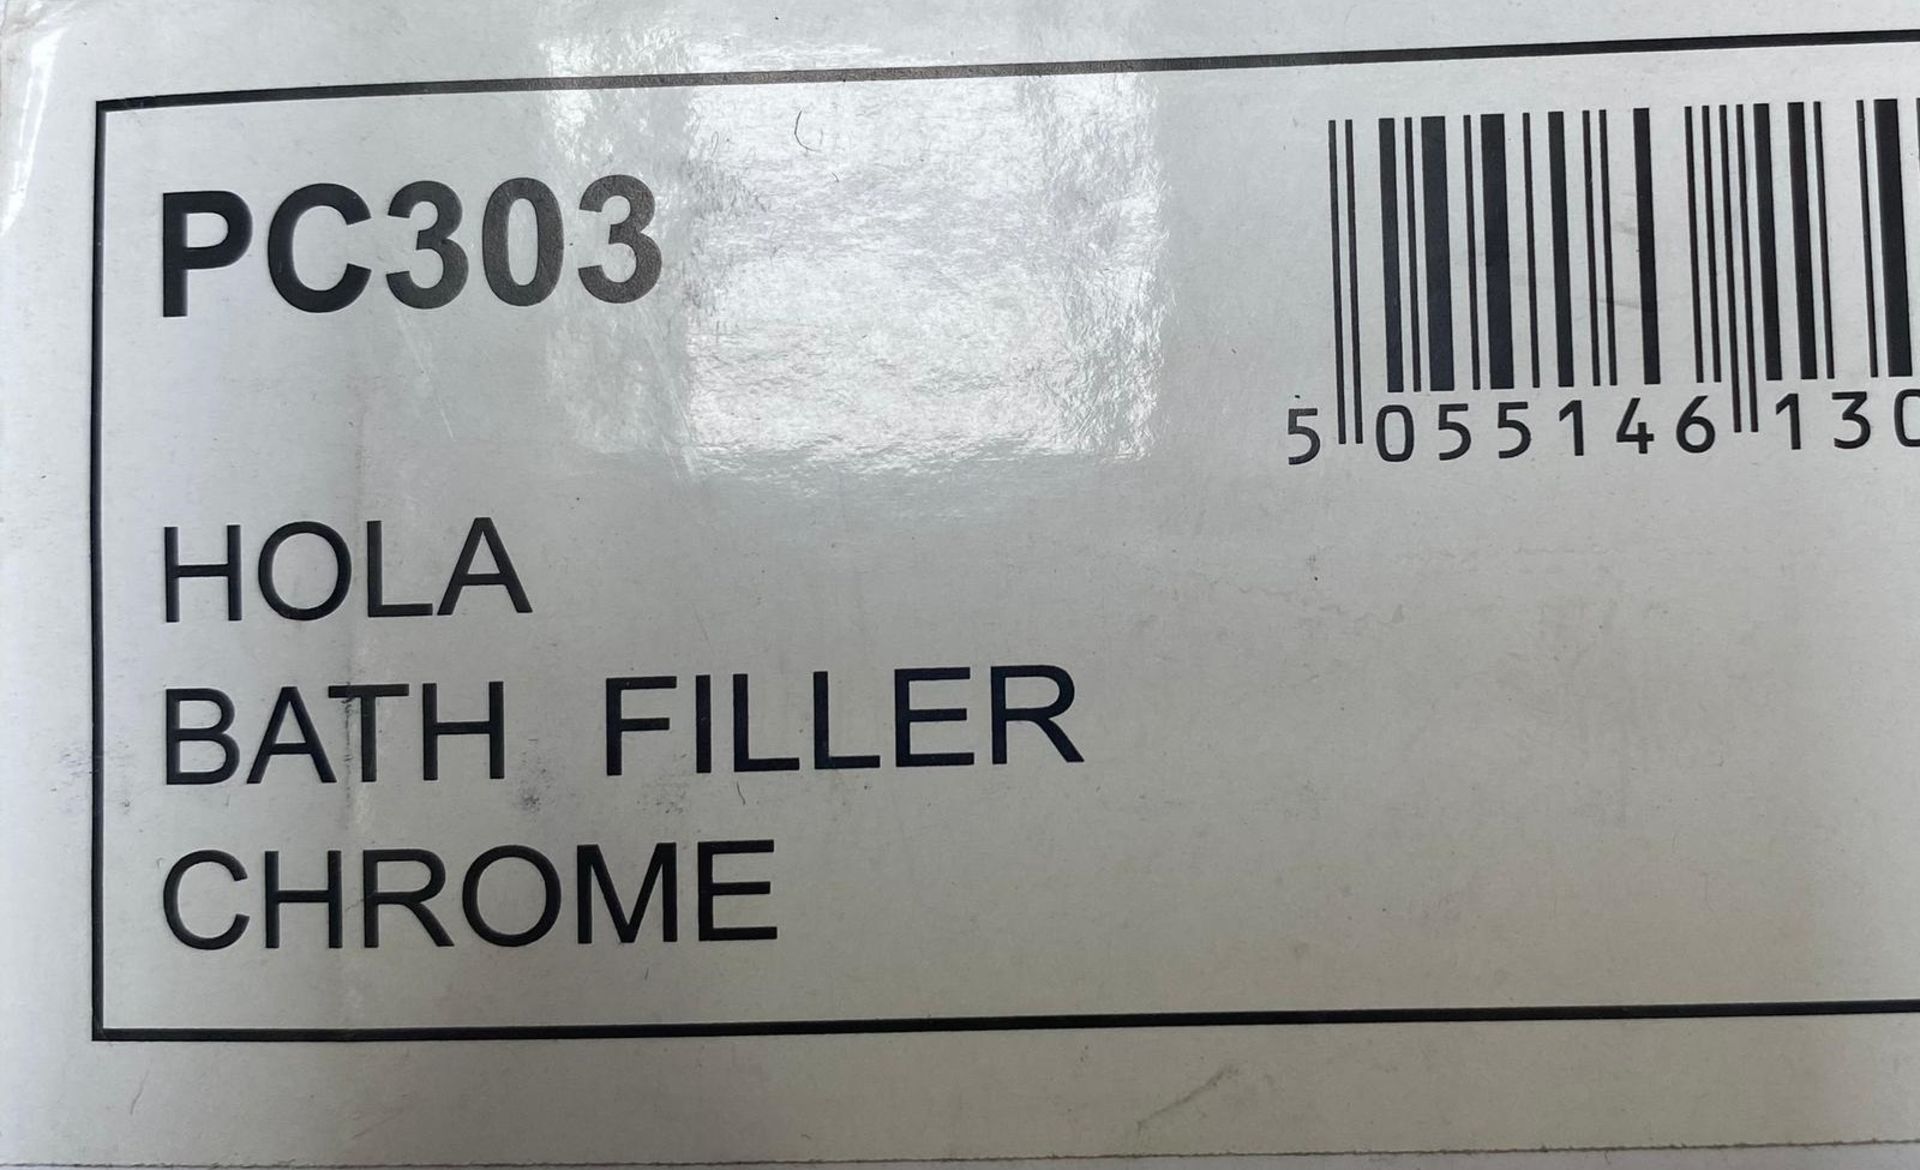 1 x Hudson Reed Hola Bath Filler in Chrome - Code: PC303 -New Boxed Stock- Location: Altrincham WA14 - Image 5 of 5